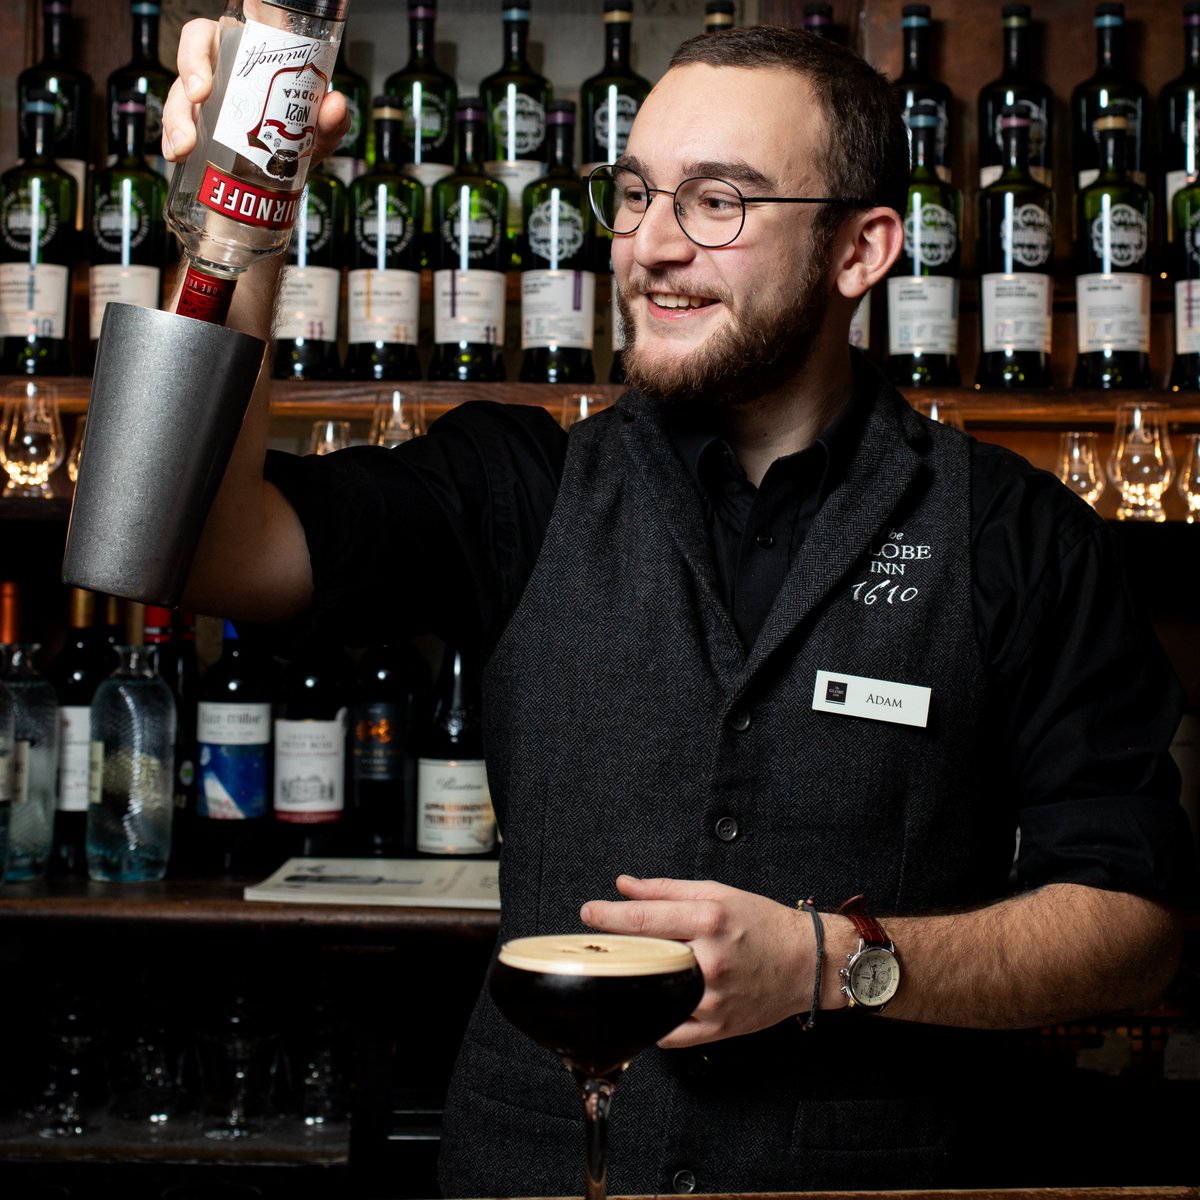 Beat those Friday blues with drinks at The Globe Inn, Dumfries. Enjoy one of our speciality cocktails, shaken and stirred by our resident mixologist Adam. It's always five o'clock somewhere. Good times start at The Globe Inn. Bar open Wednesday - Saturday 11am-11pm #FridayDrinks